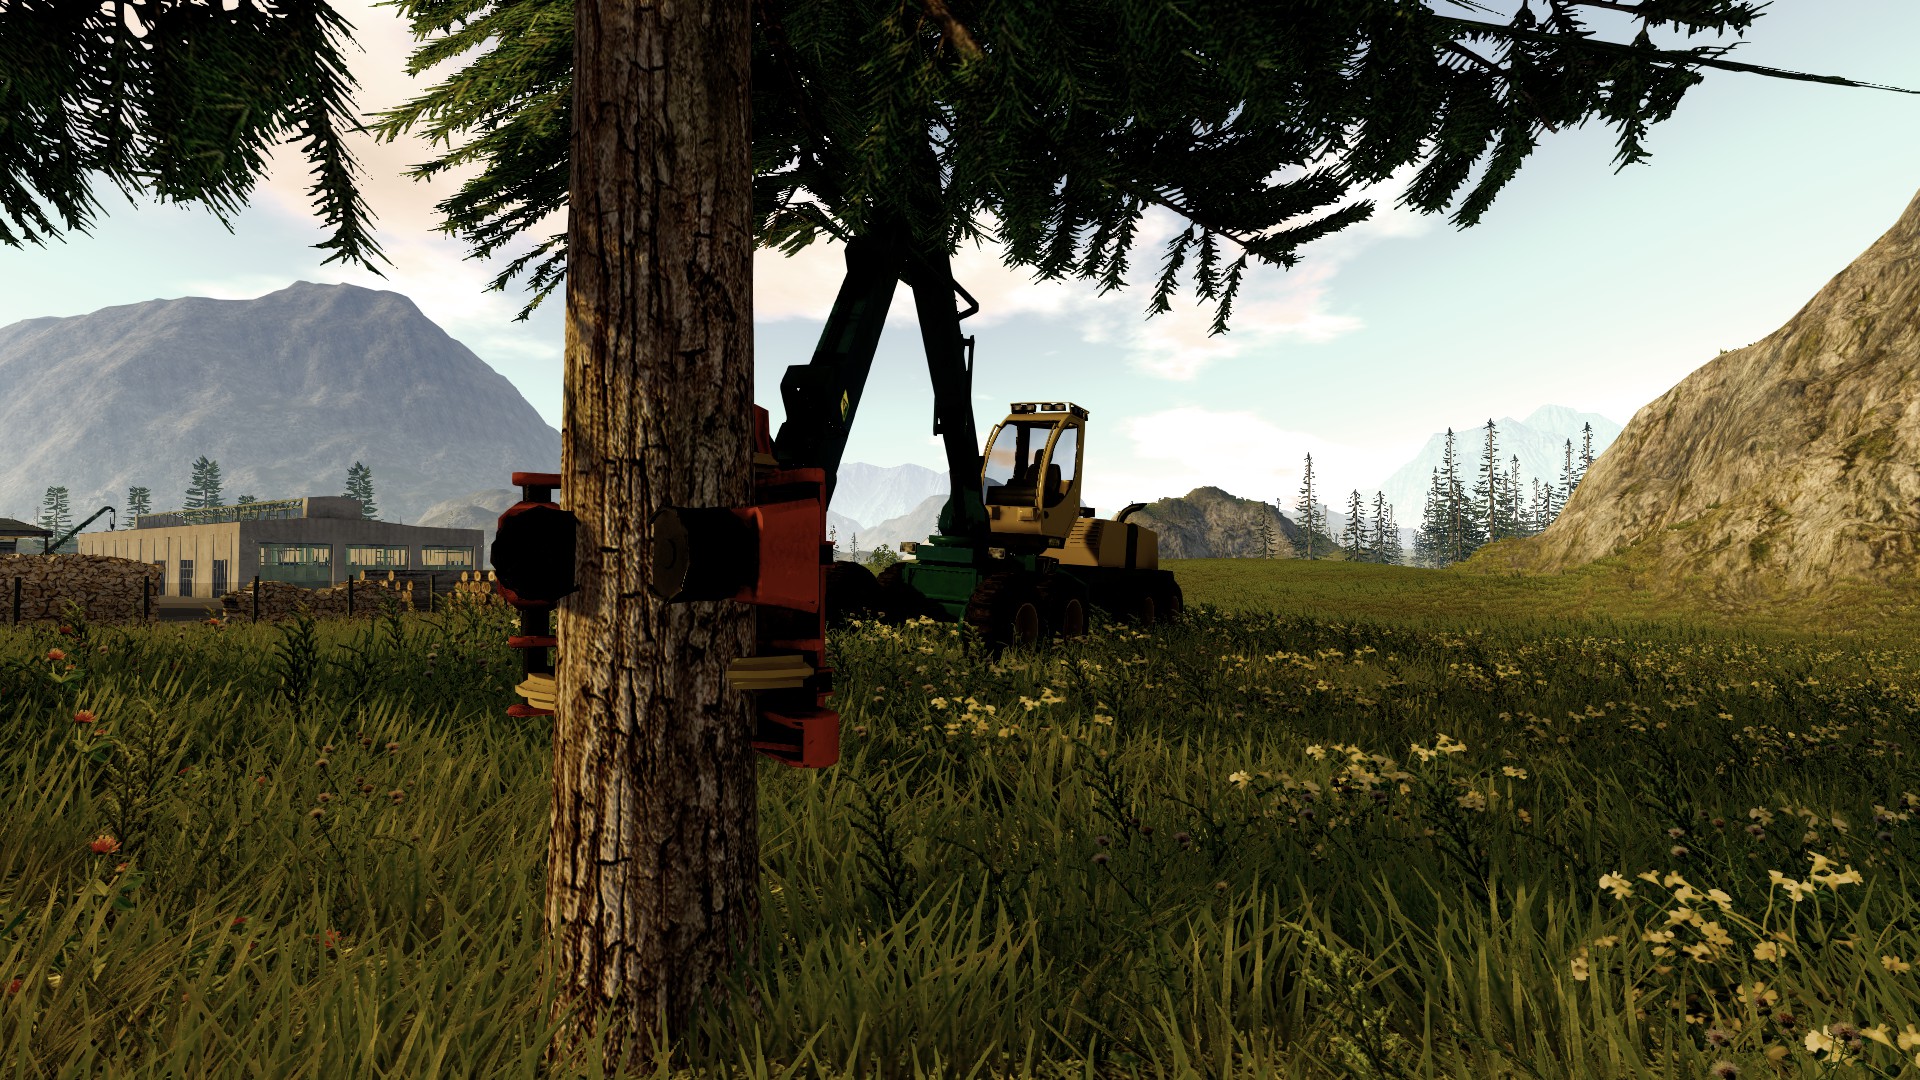 Forestry 2017 The Simulation Setup Free Download